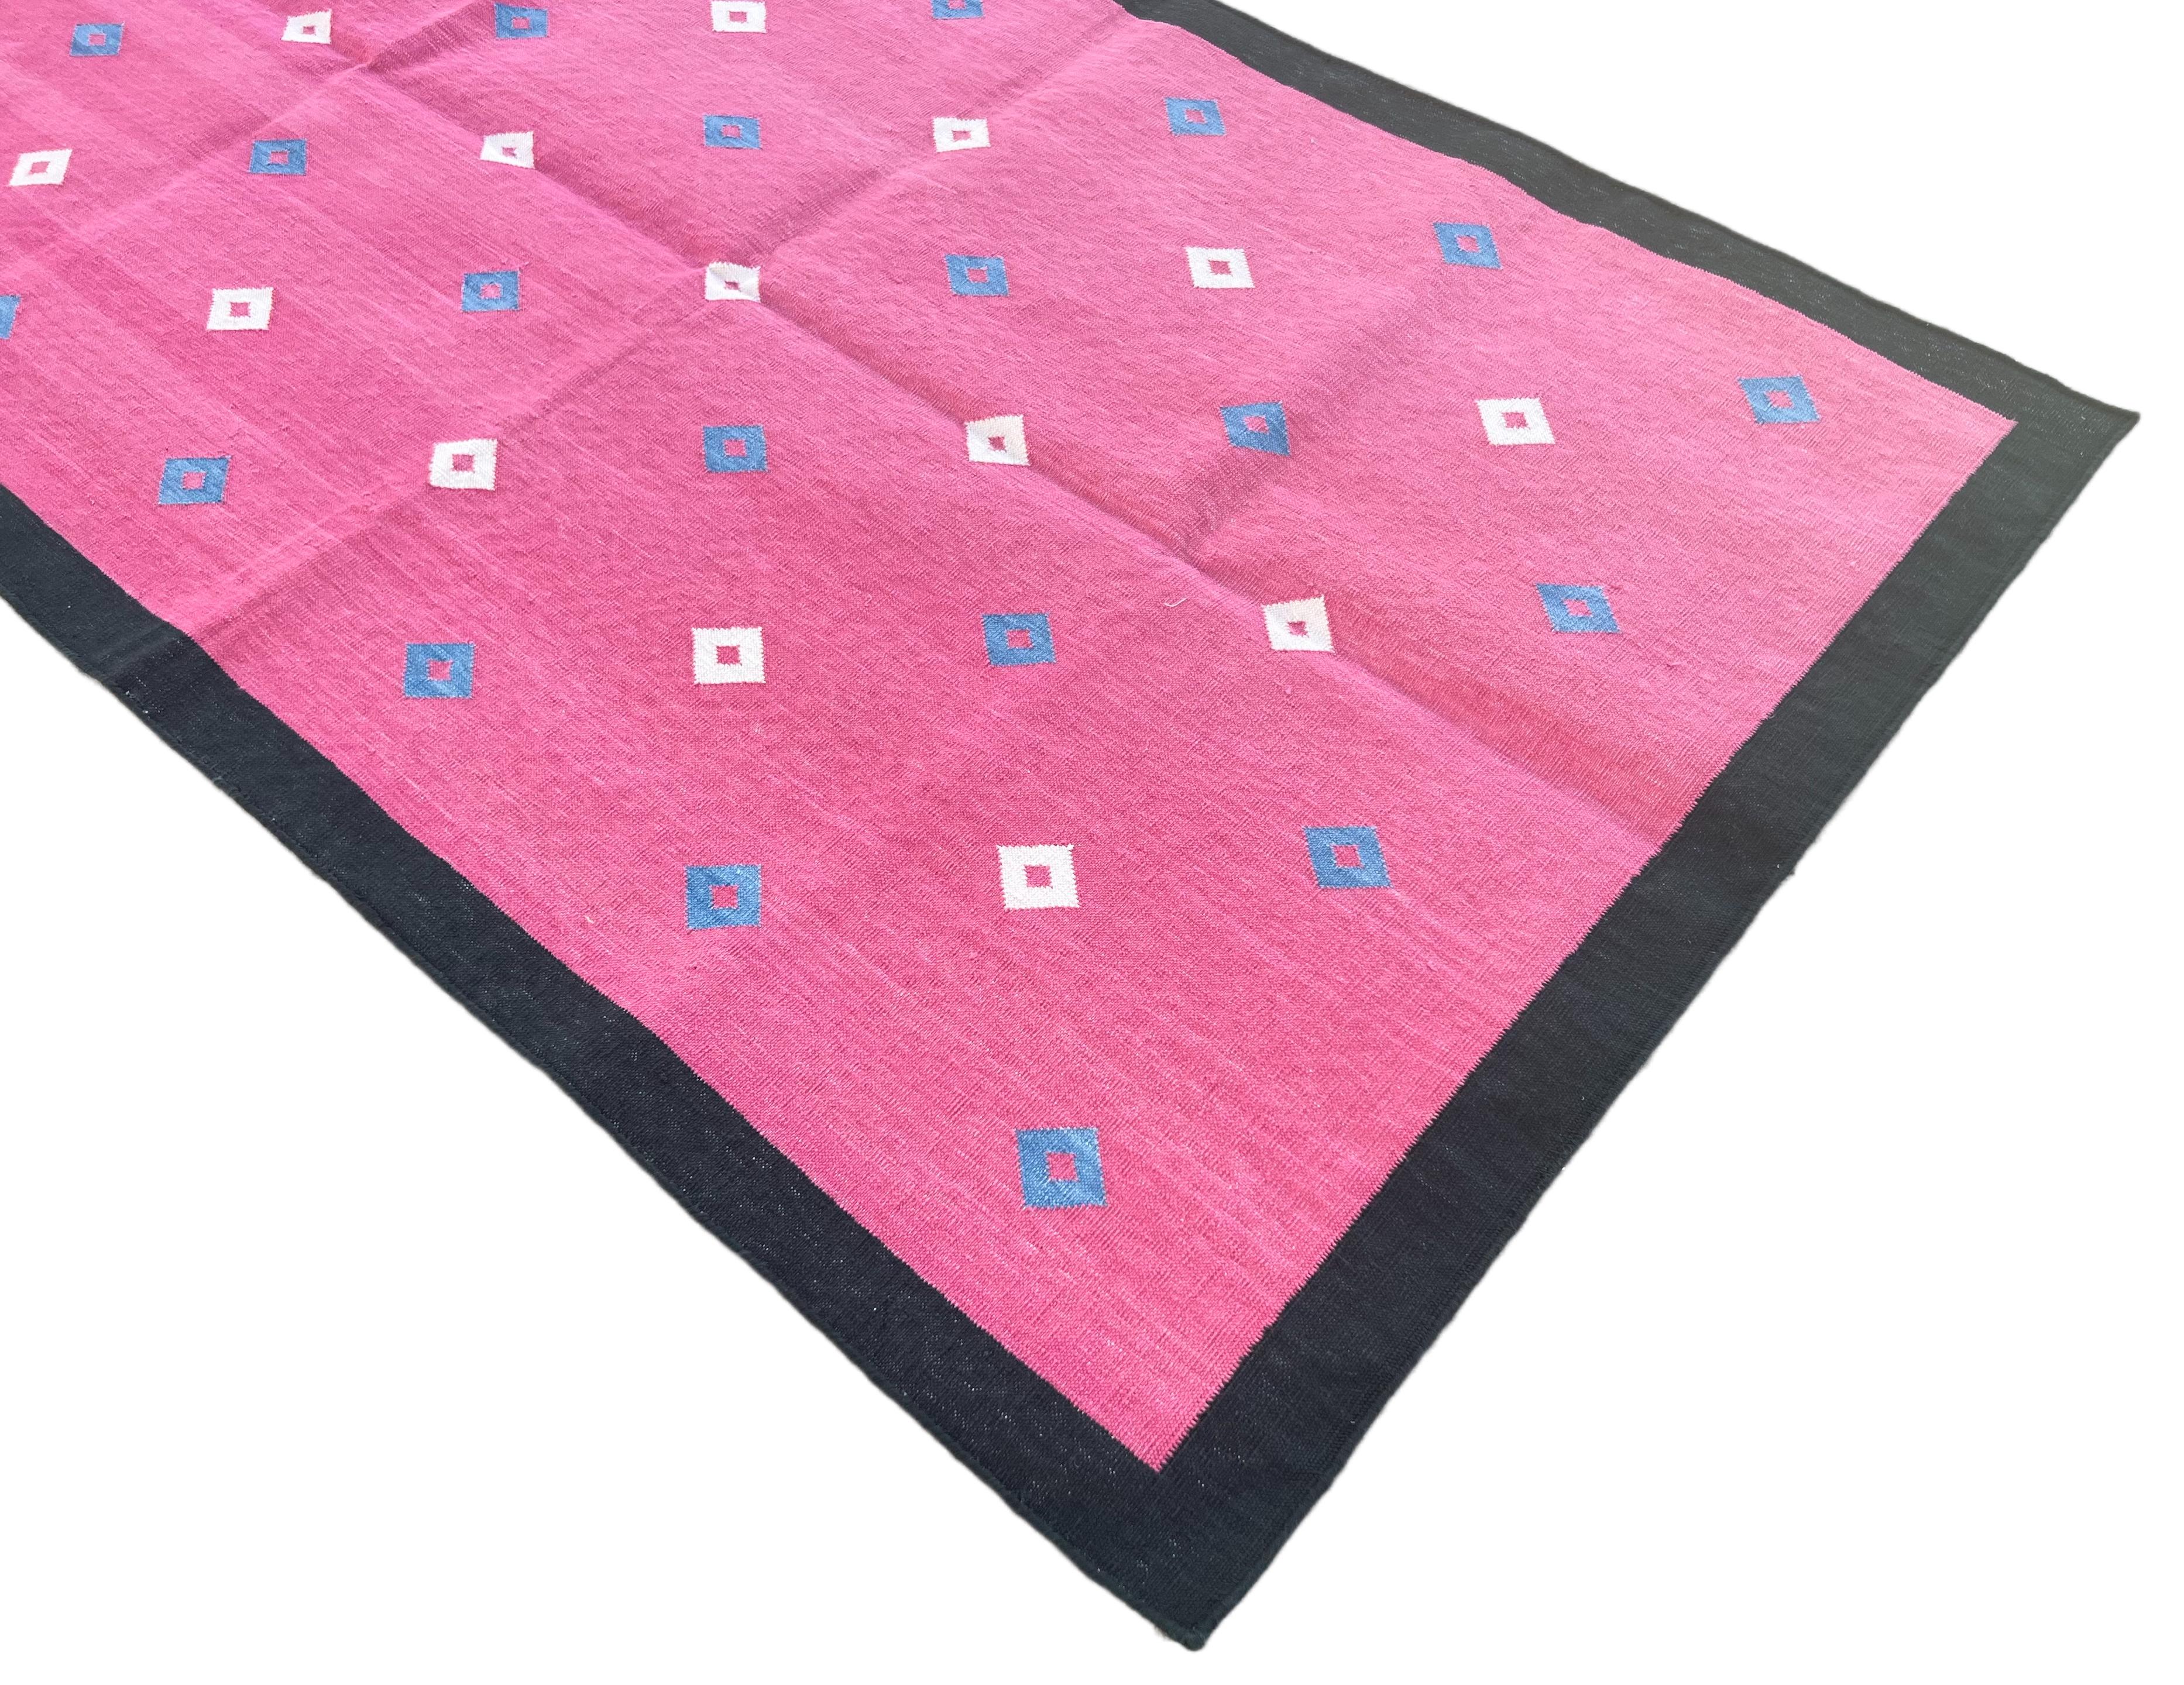 Hand-Woven Handmade Cotton Area Flat Weave Rug, 3x5 Pink And Black Diamond Indian Dhurrie For Sale